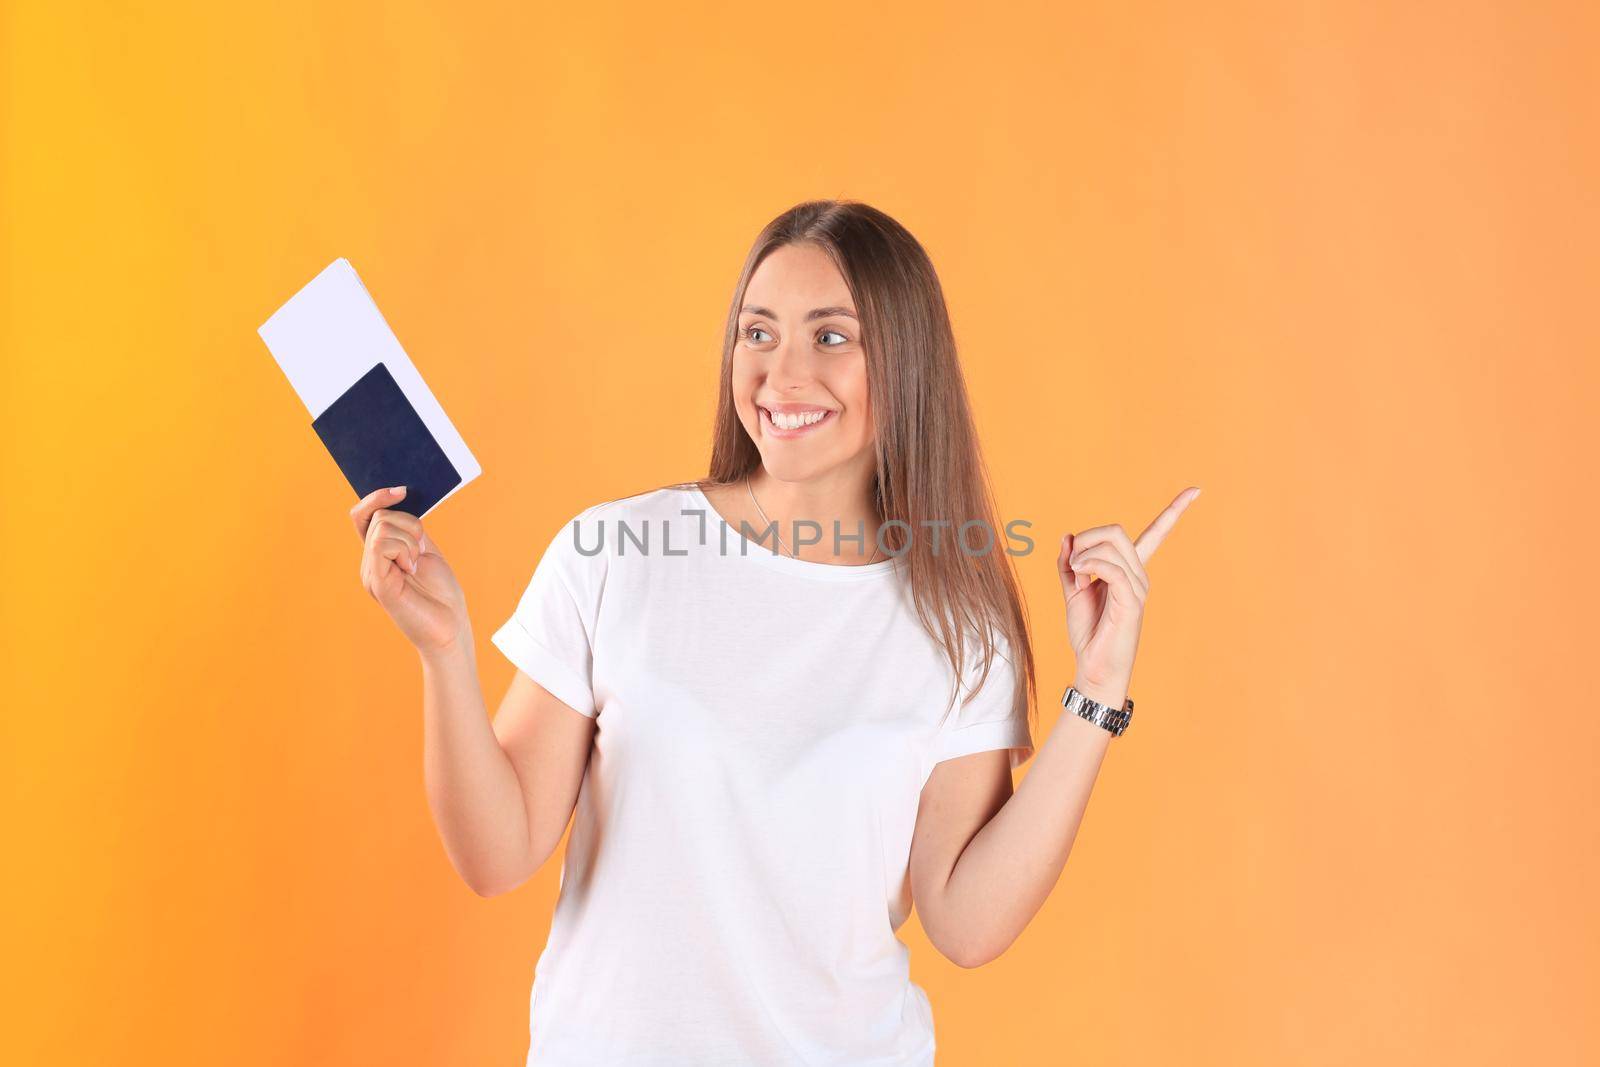 Excited young woman tourist standing isolated on yellow background holding passport with tickets.